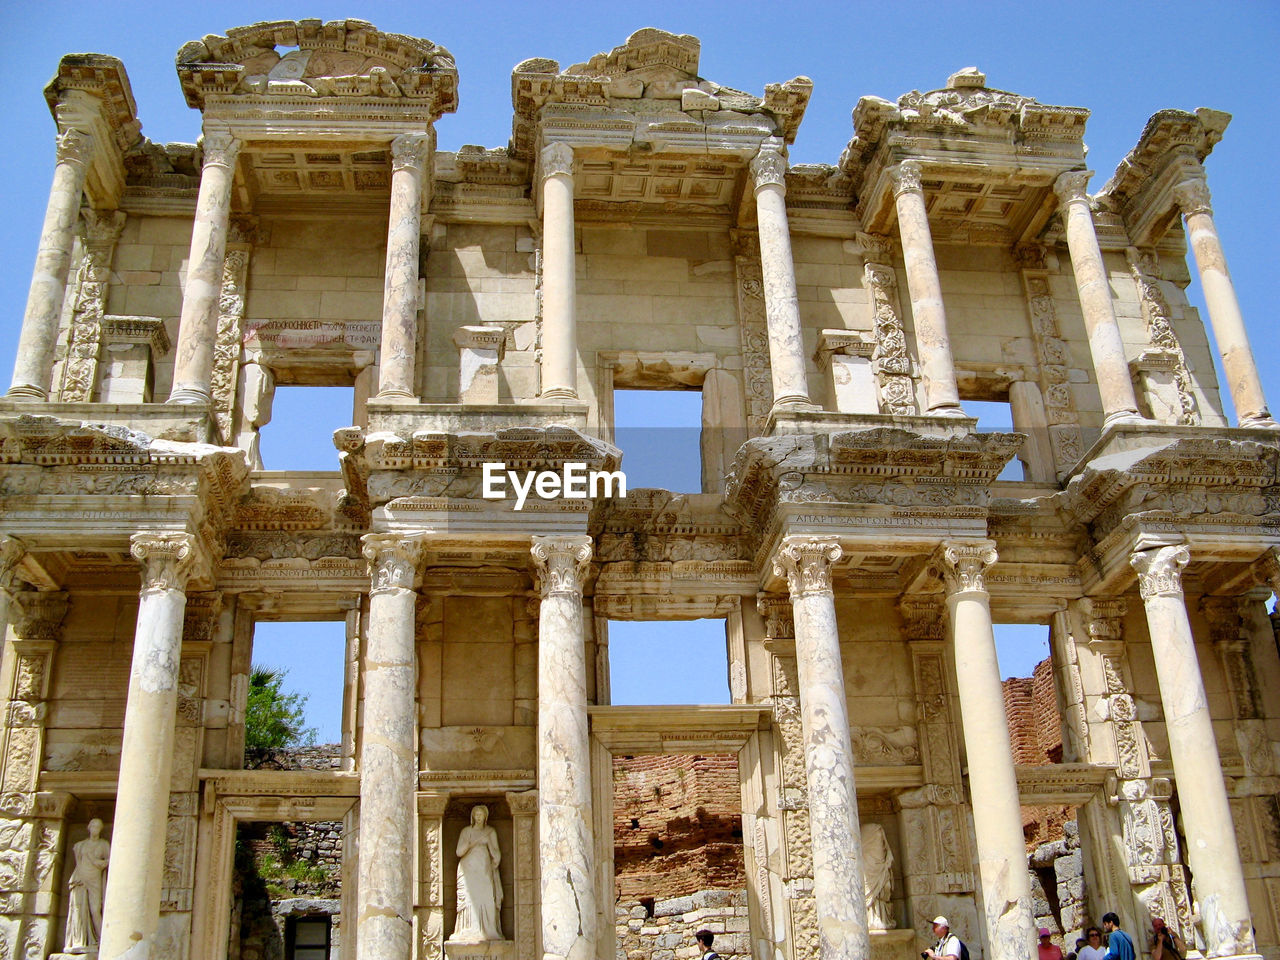 Looking up at the library of celsus facade in ephesus, turkey.